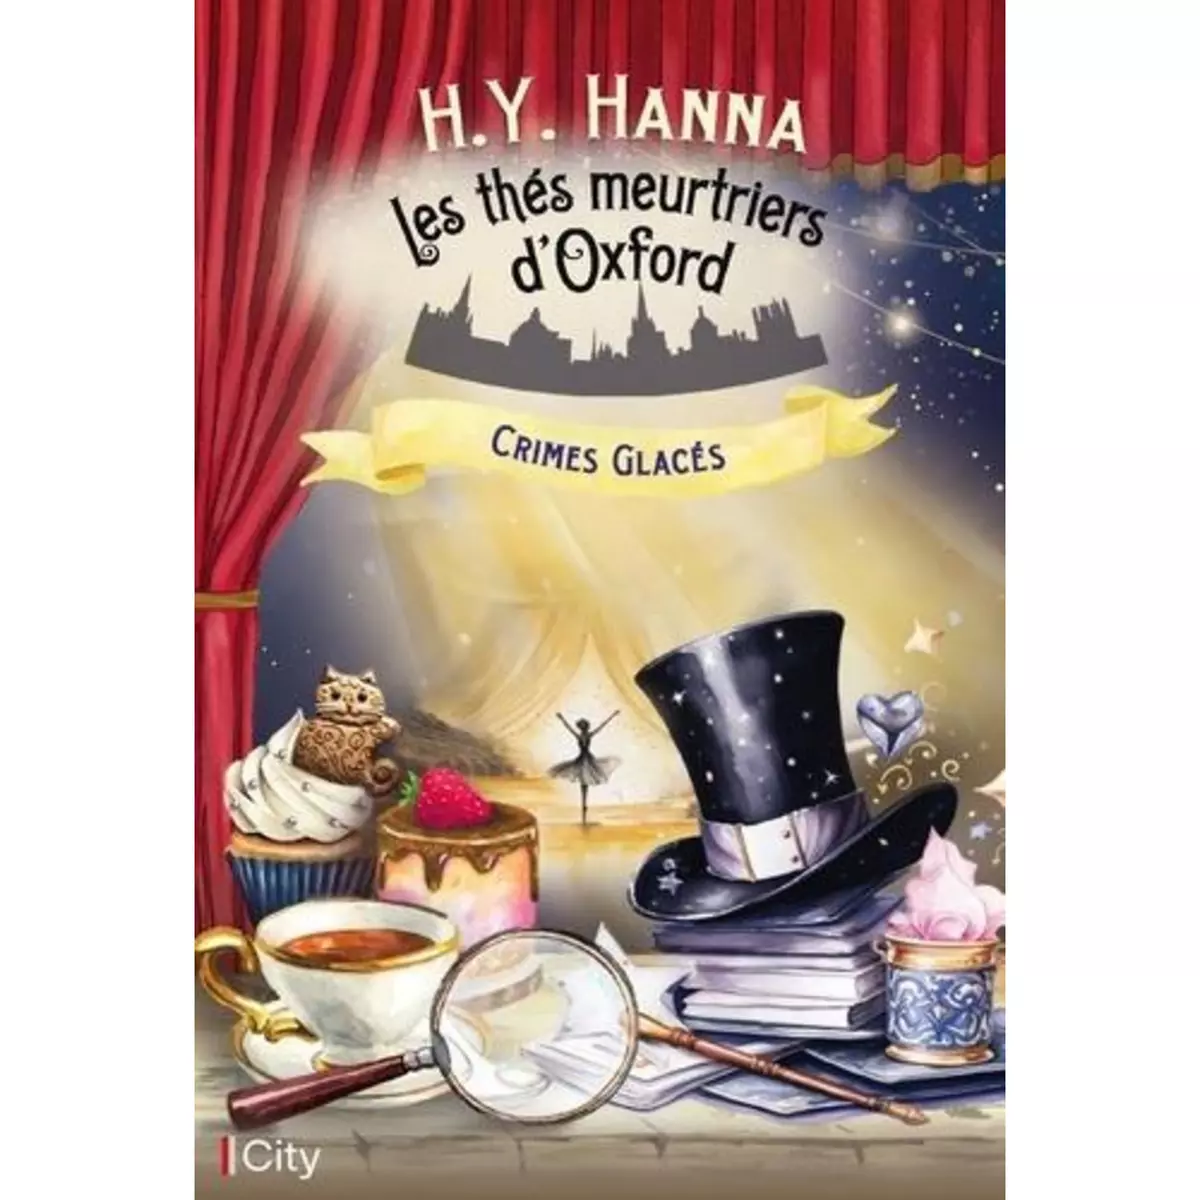  LES THES MEURTRIERS D'OXFORD TOME 9 : CRIMES GLACES, Hanna H.Y.